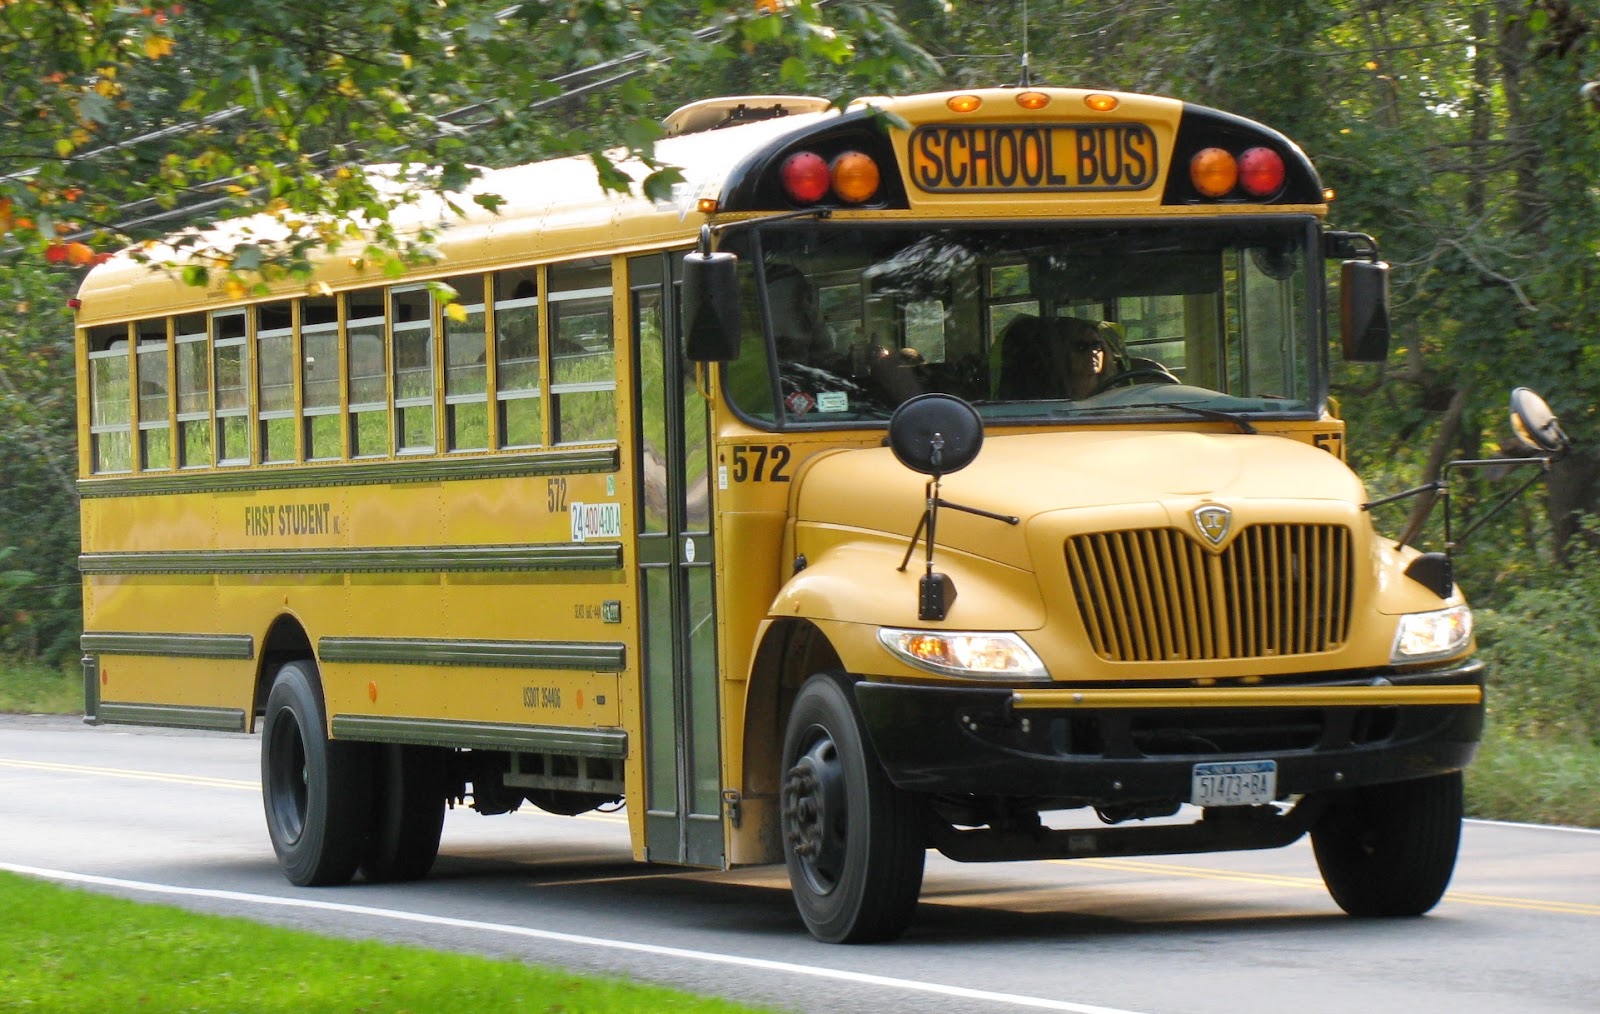 File:ICCE First Student Wallkill School Bus.jpg - Wikimedia Commons